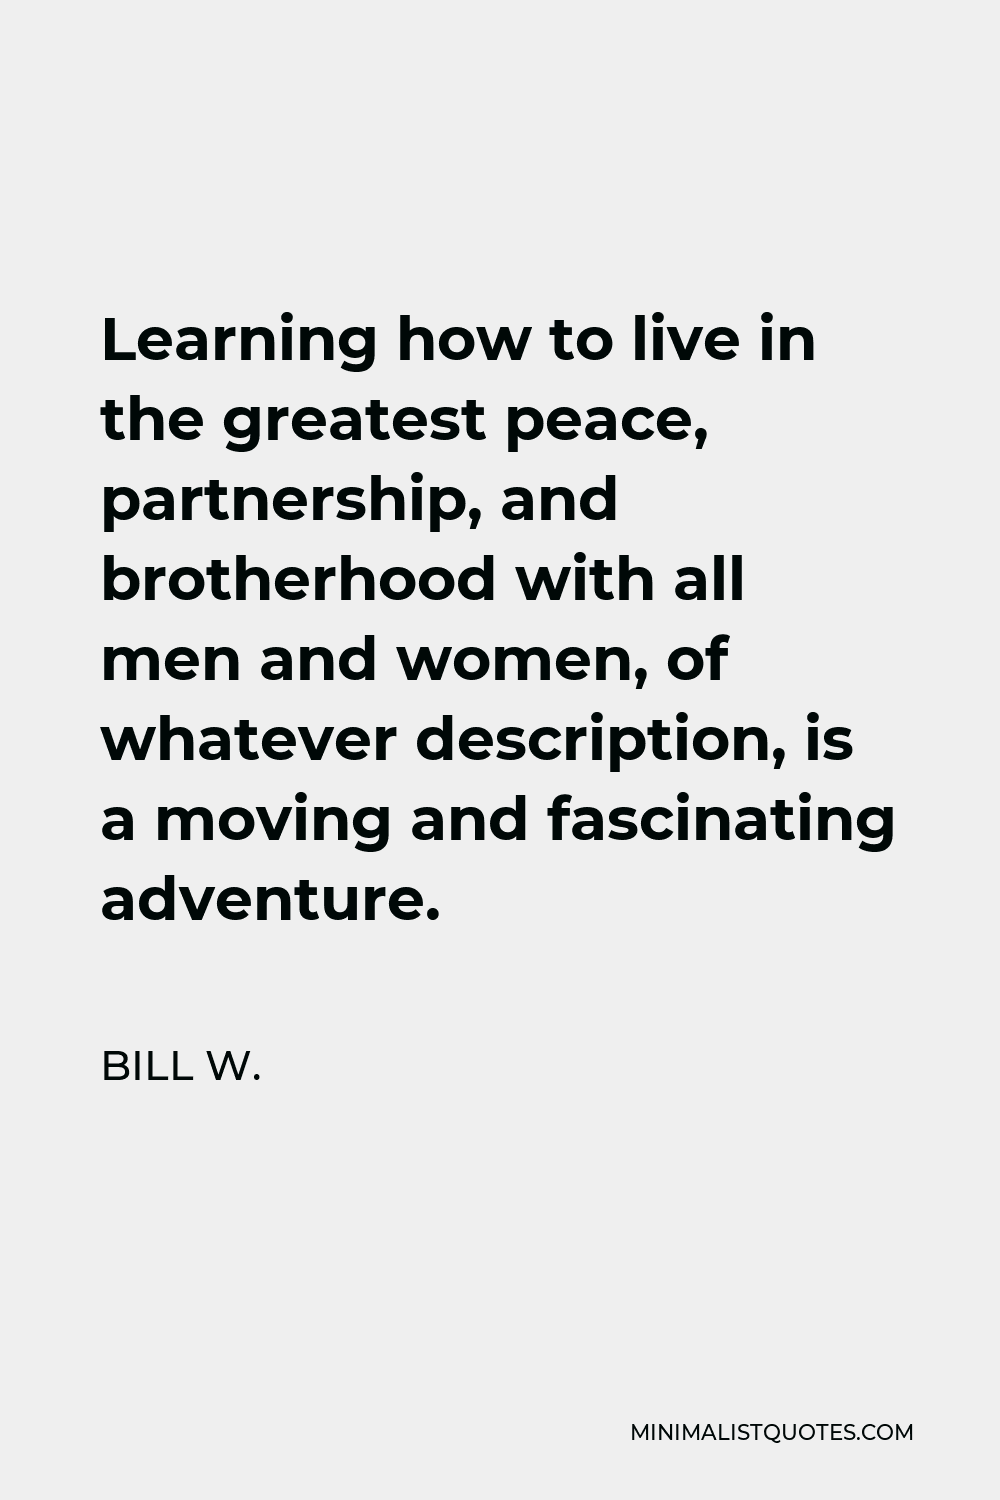 Bill W. Quote - Learning how to live in the greatest peace, partnership, and brotherhood with all men and women, of whatever description, is a moving and fascinating adventure.